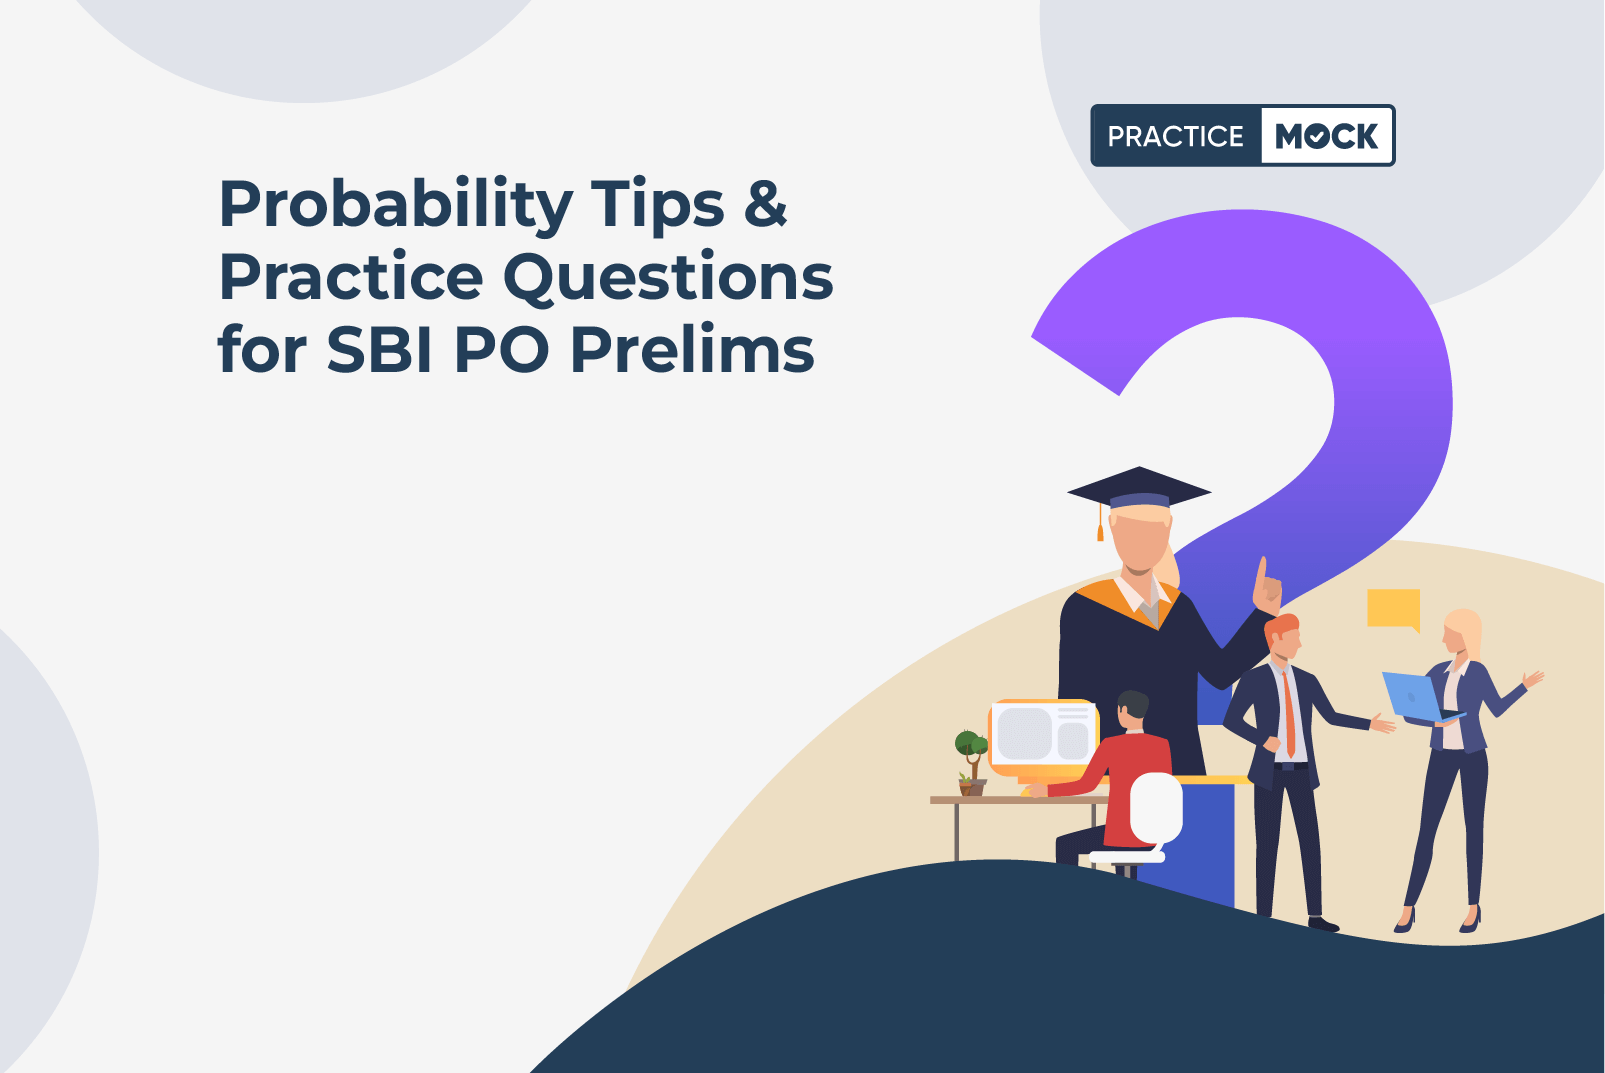 Probability Tips & Practice Questions for SBI PO Prelims